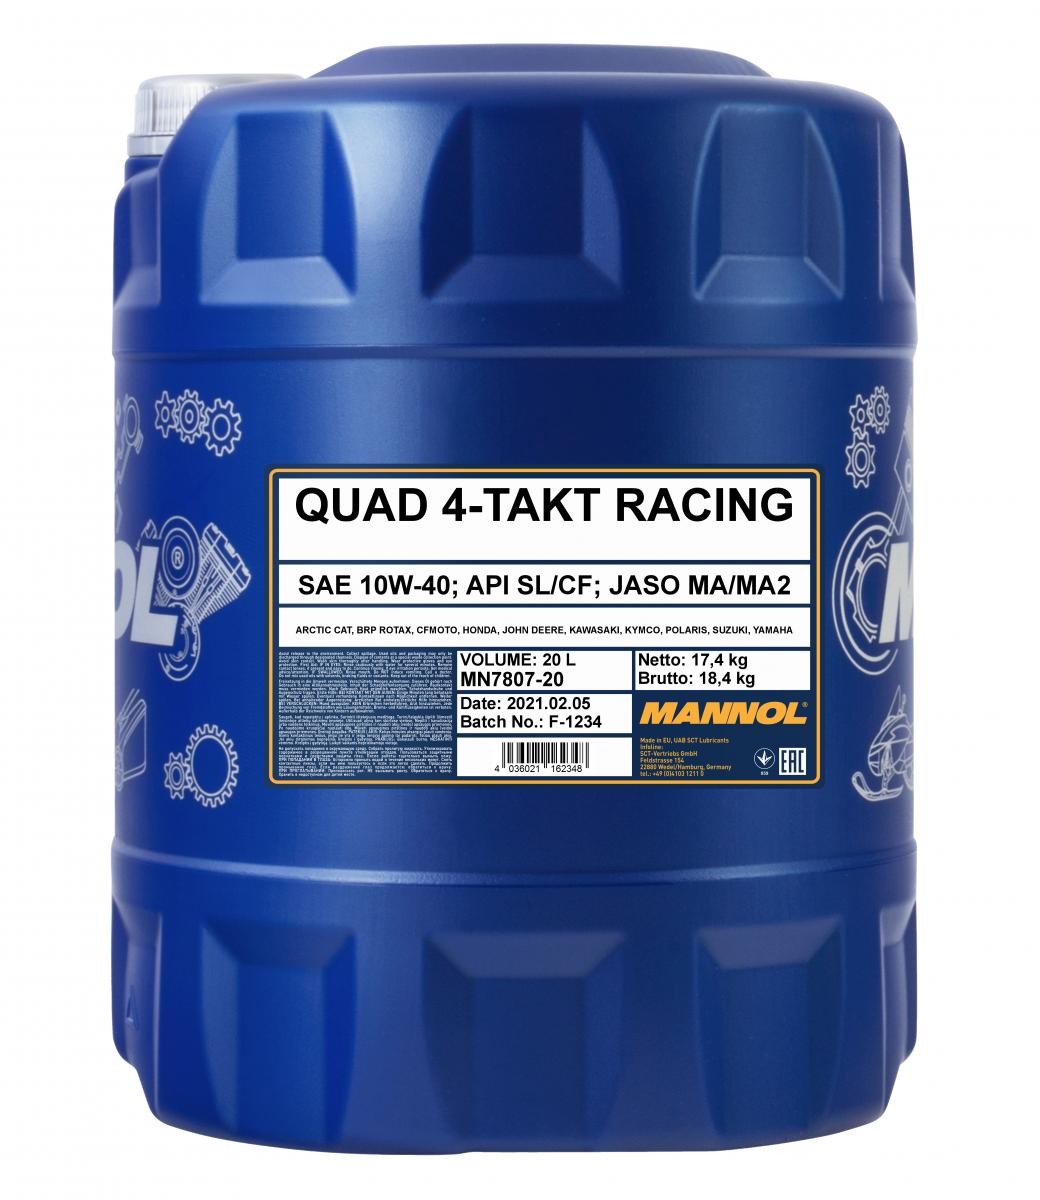 MANNOL Quad 4-Takt Racing 10W-40, 20l, Part Synthetic Oil Motor oil MN7807-20 buy